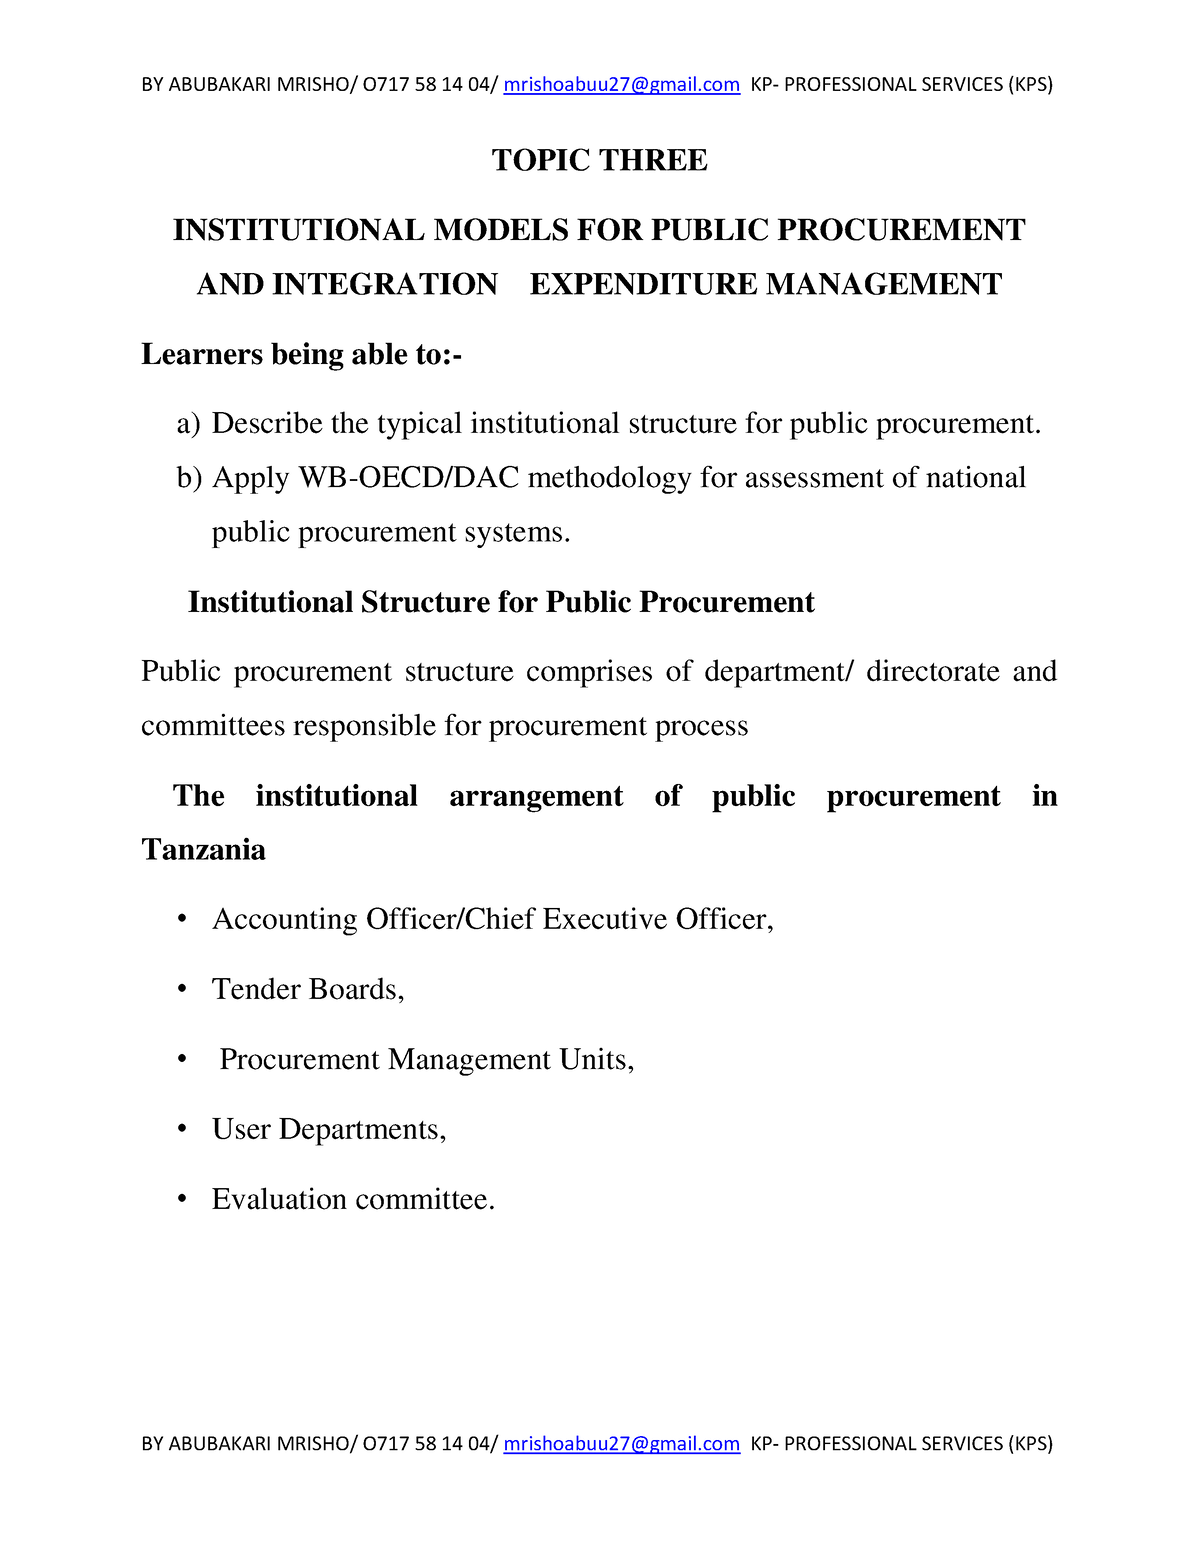 3. International Model FOR Public Procurement AND Intergration WITH ...